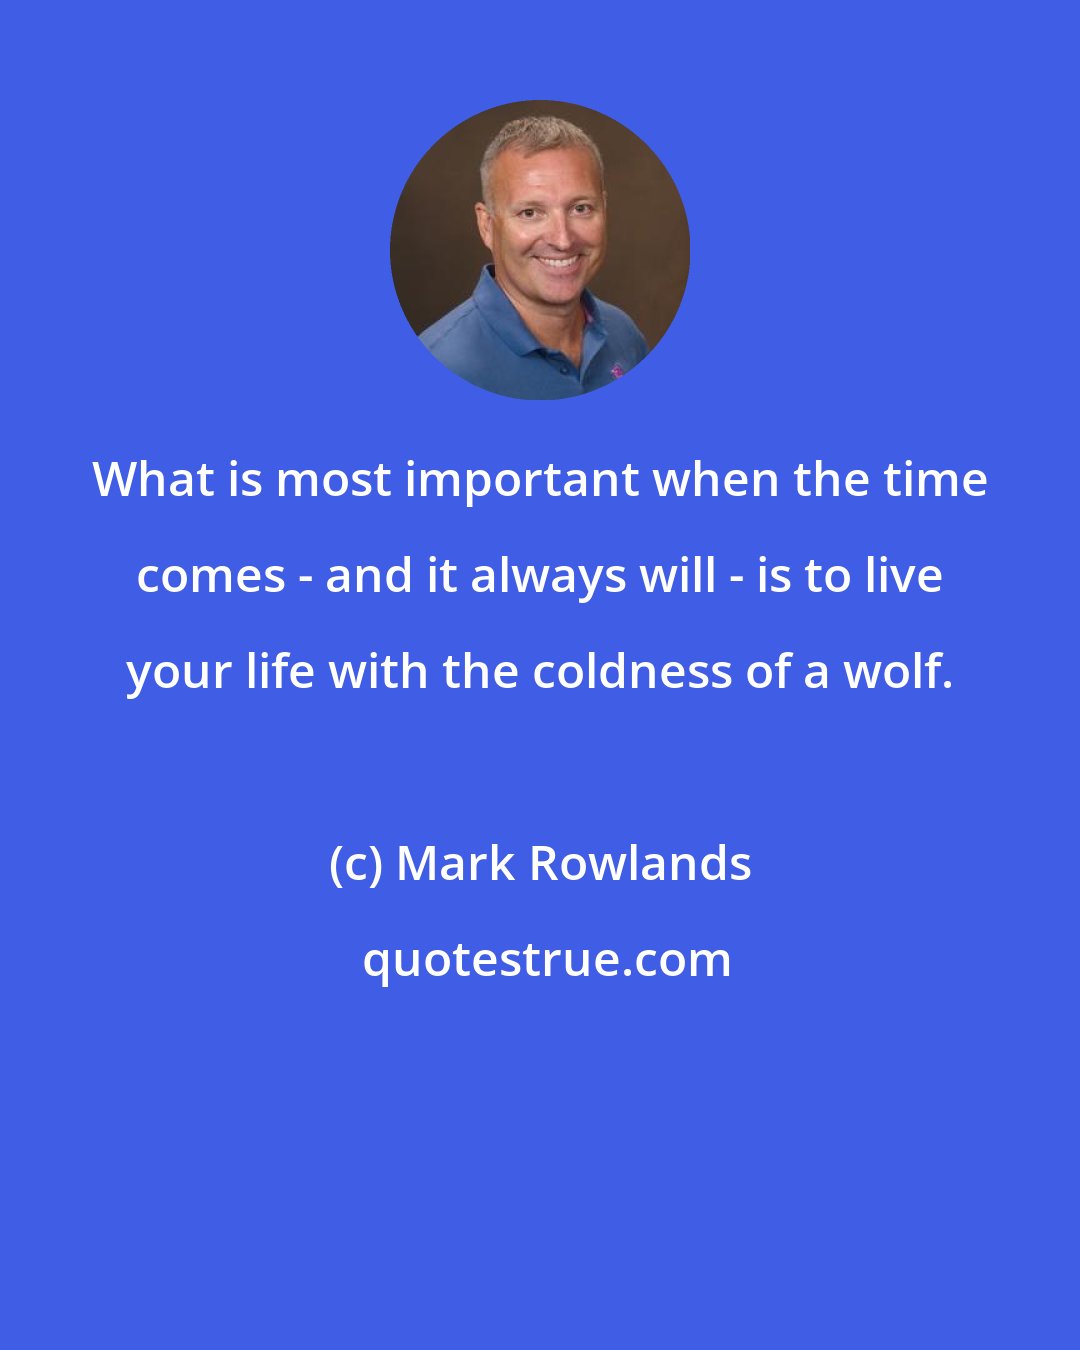 Mark Rowlands: What is most important when the time comes - and it always will - is to live your life with the coldness of a wolf.